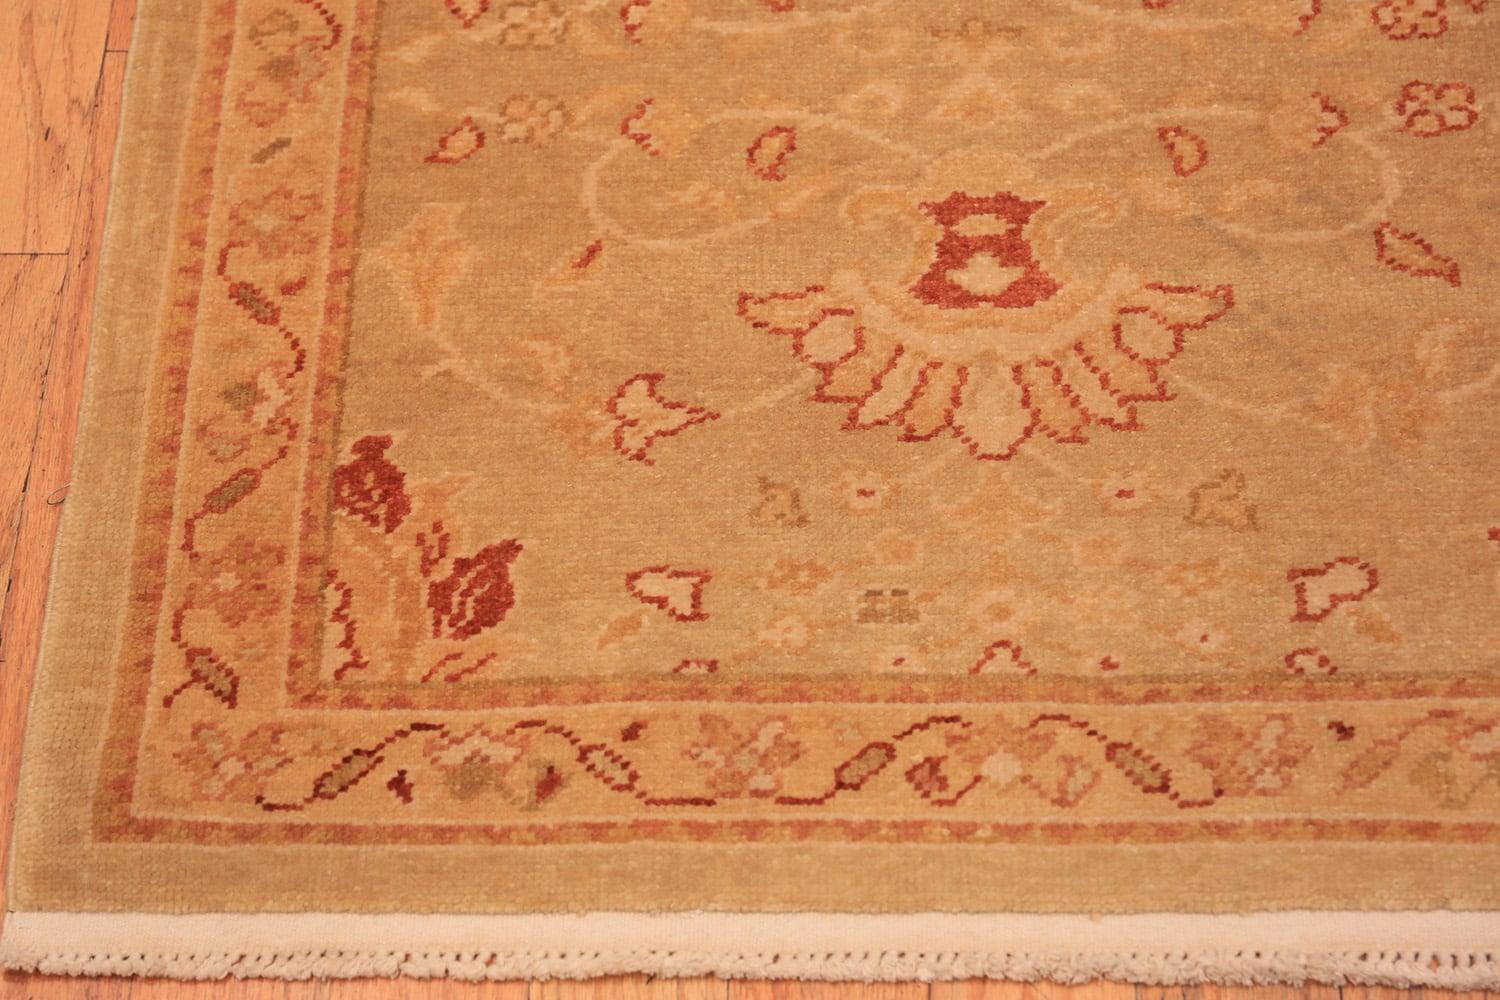 Charming Contemporary Modern Oushak Runner Rug / Country of Origin: Turkey, Circa Date: Modern. Size: 2 ft 9 in x 13 ft 4 in (0.84 m x 4.06 m)